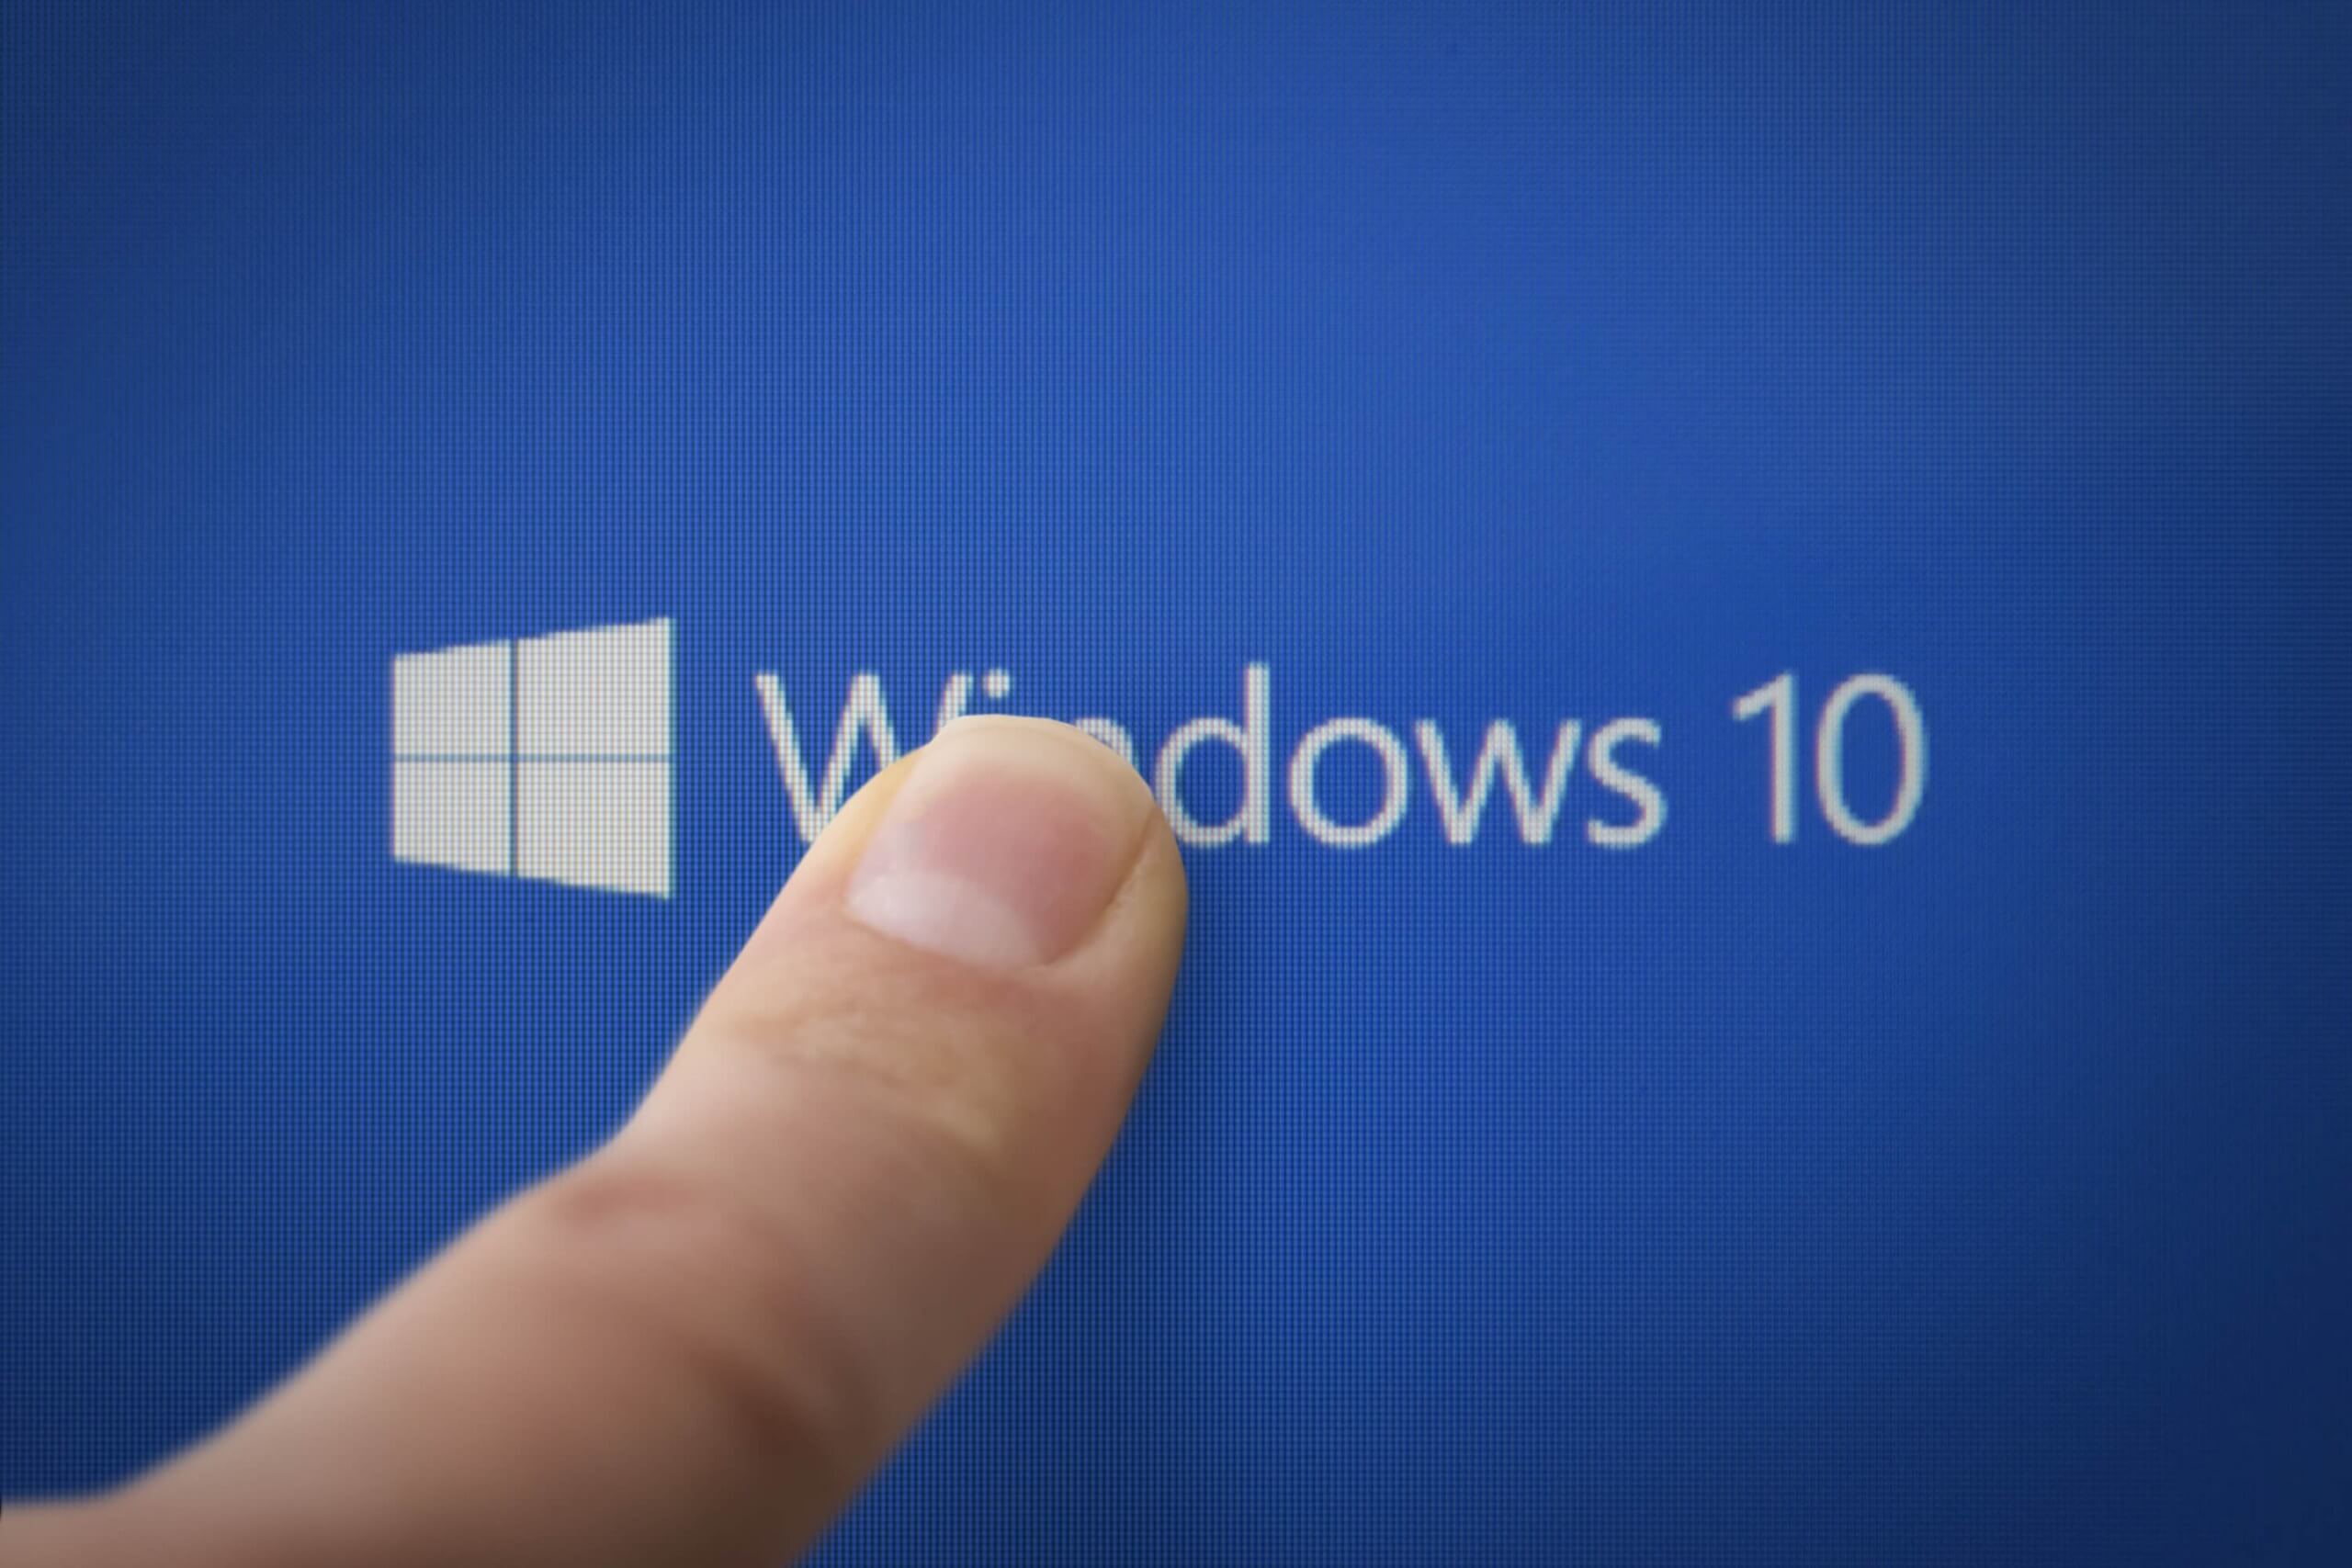 Windows 7 users can still upgrade to Windows 10 for free